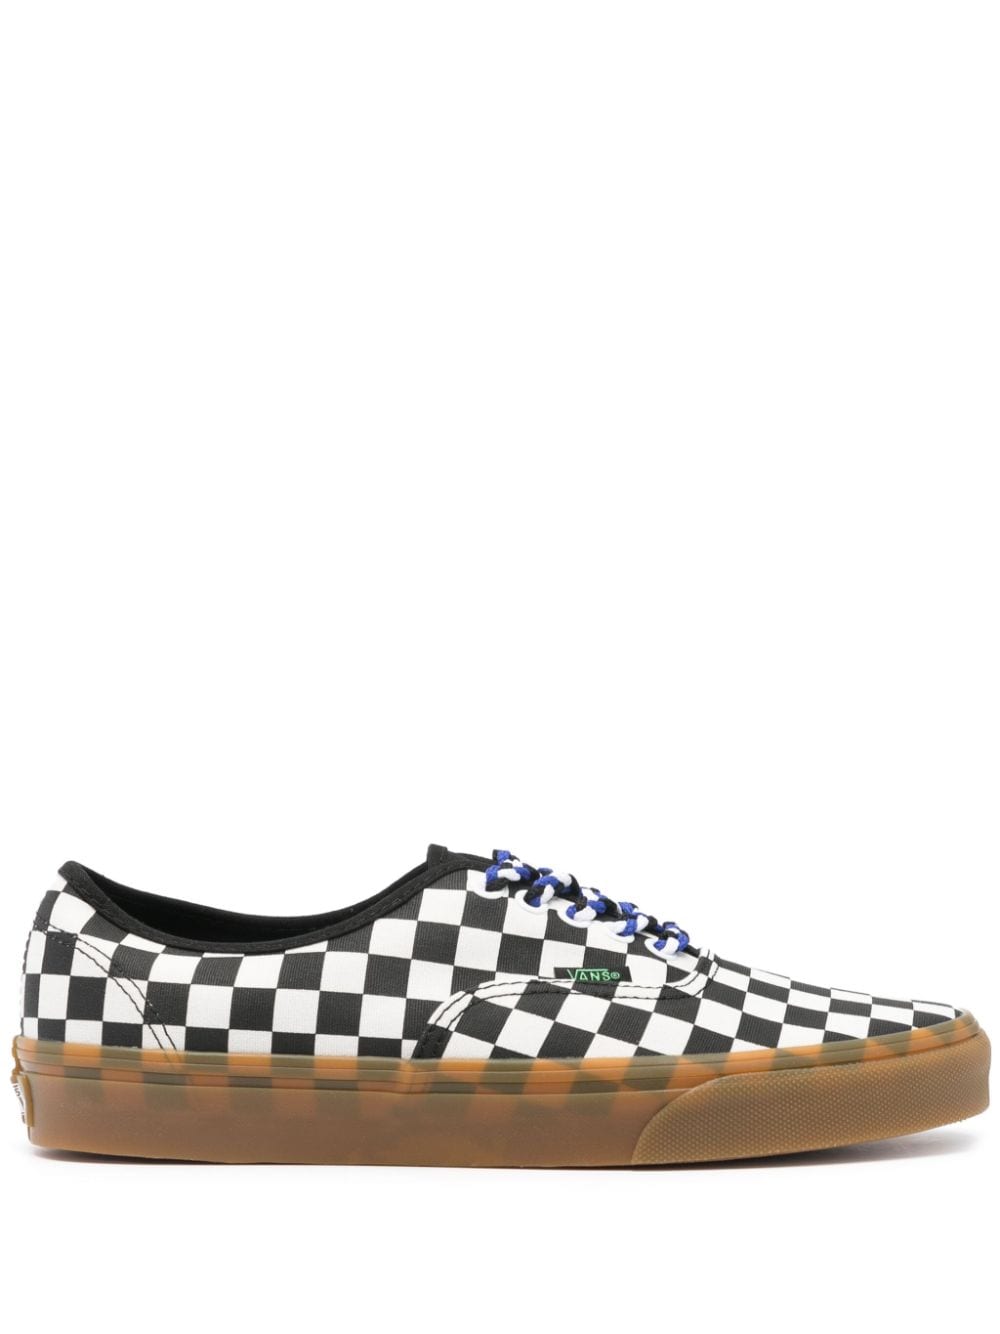 Vans Authentic checkerboard sneakers White